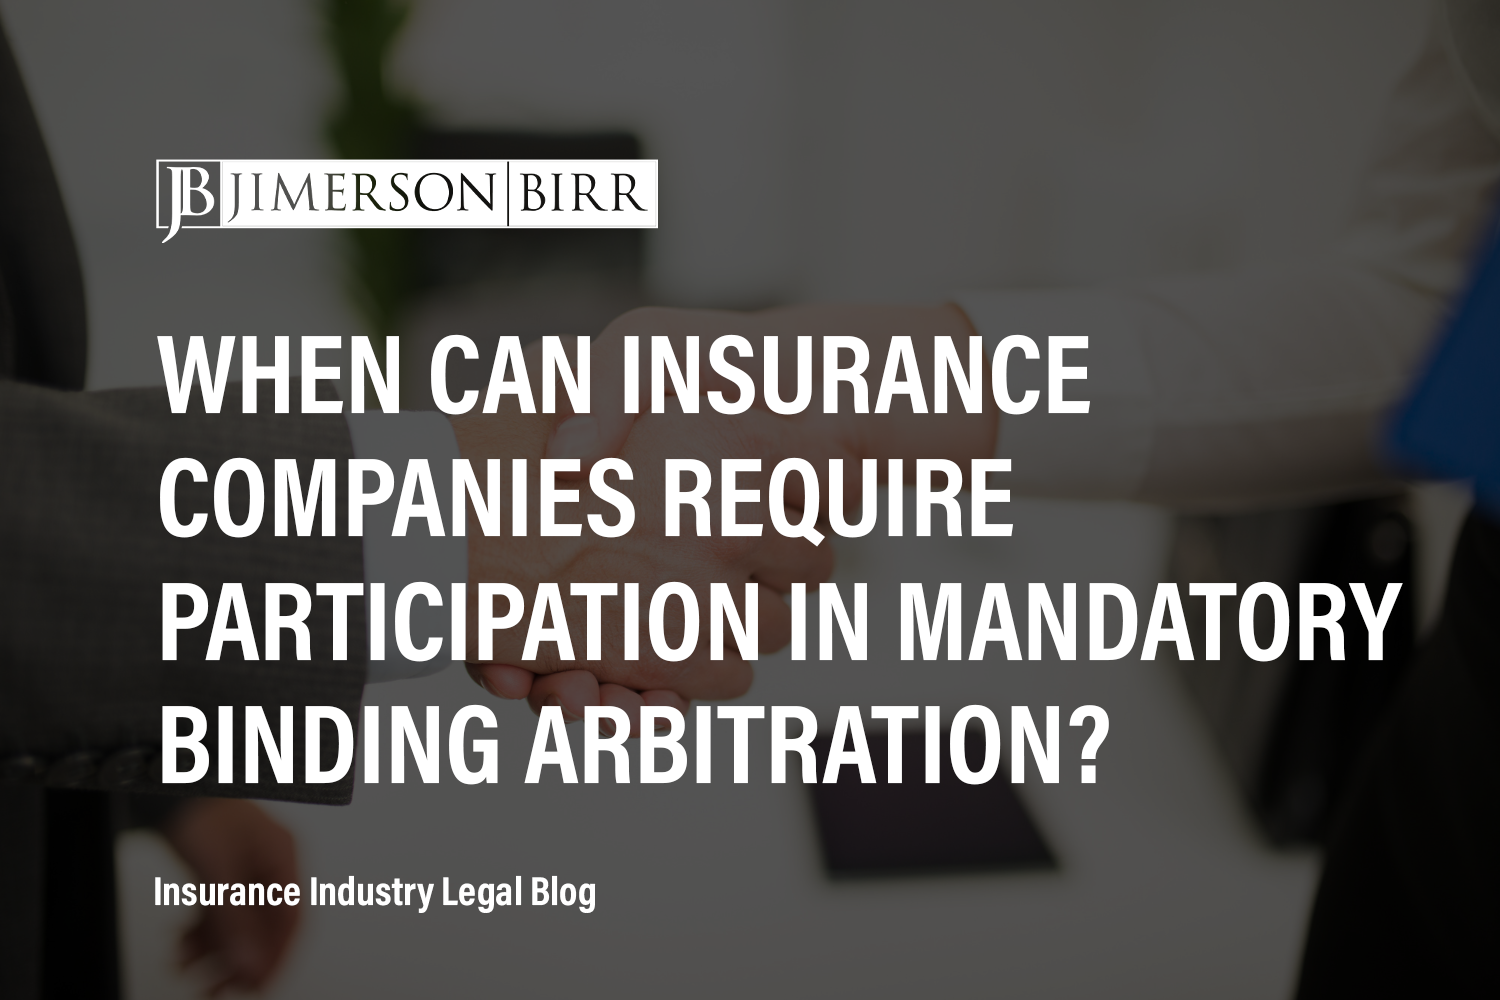 When Can Insurance Companies Require Participation in Mandatory Binding Arbitration?